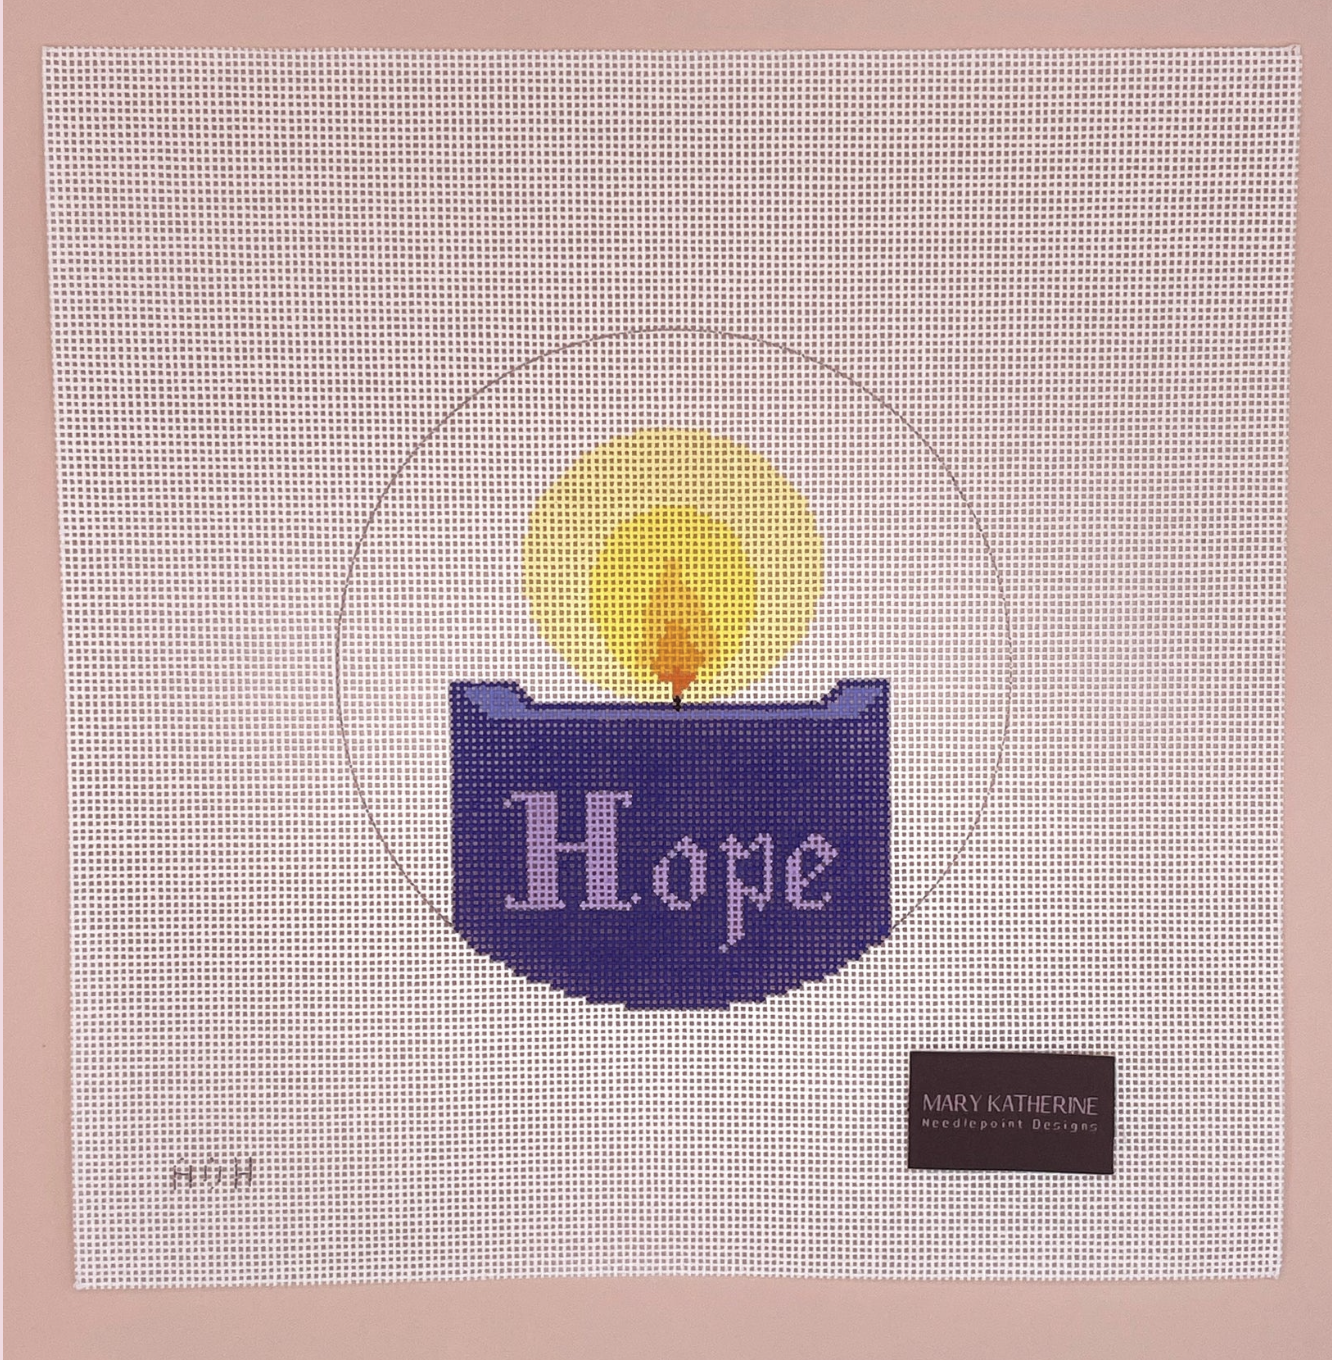 Canvas ADVENT ROUND 5" - HOPE  MKN0018